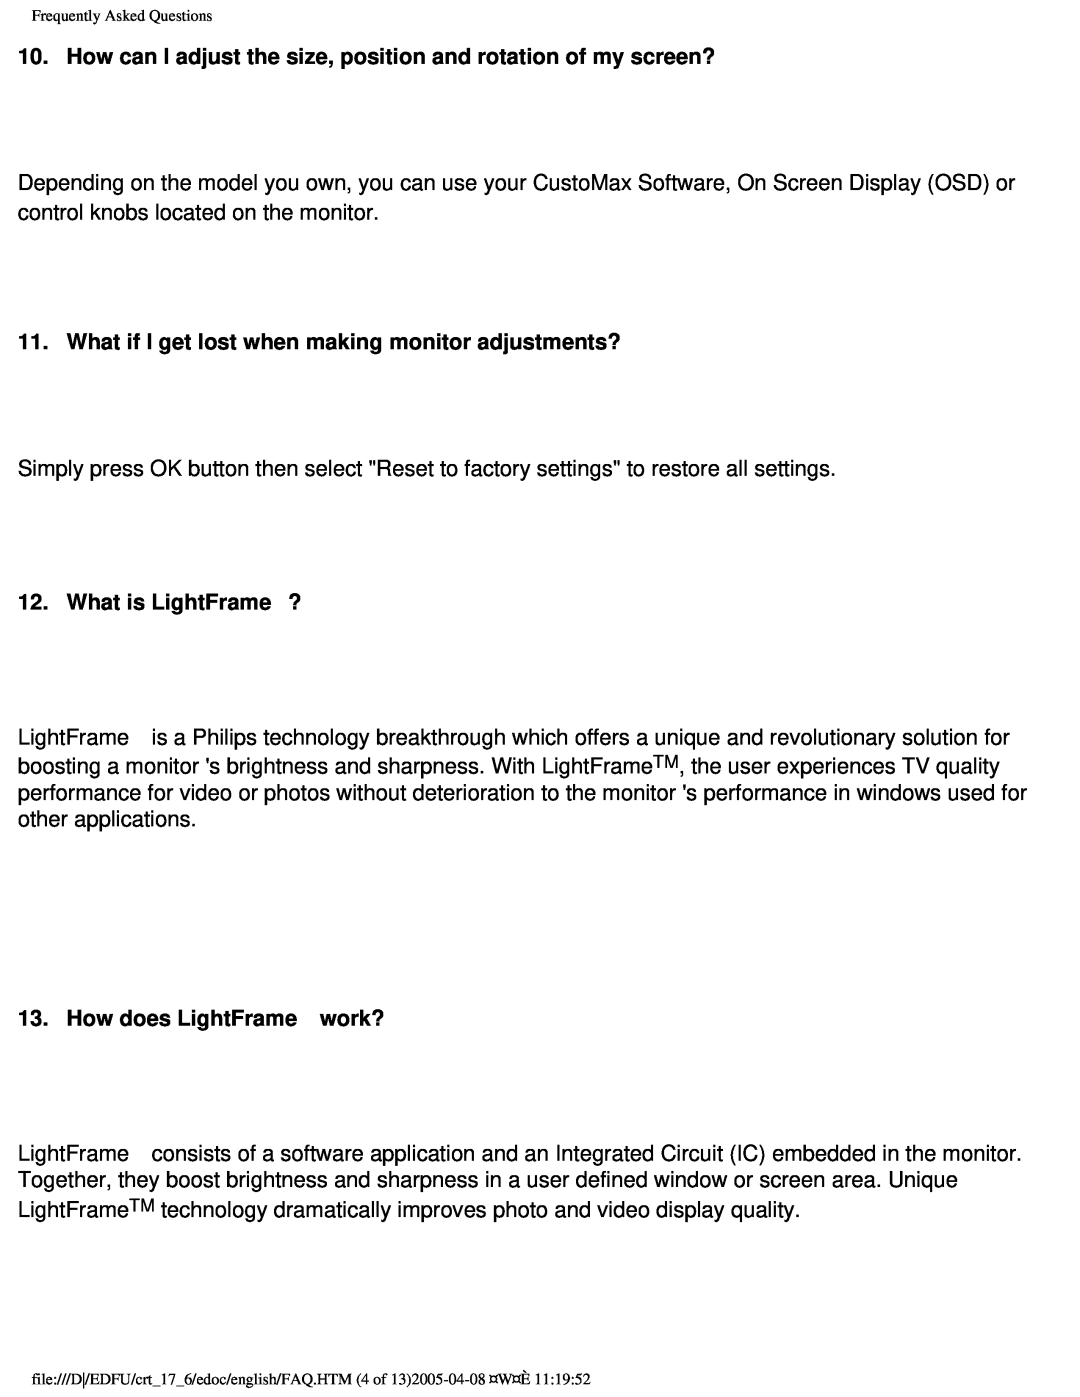 Philips 107C65 user manual What is LightFrame™?, How does LightFrame™ work?, Frequently Asked Questions 